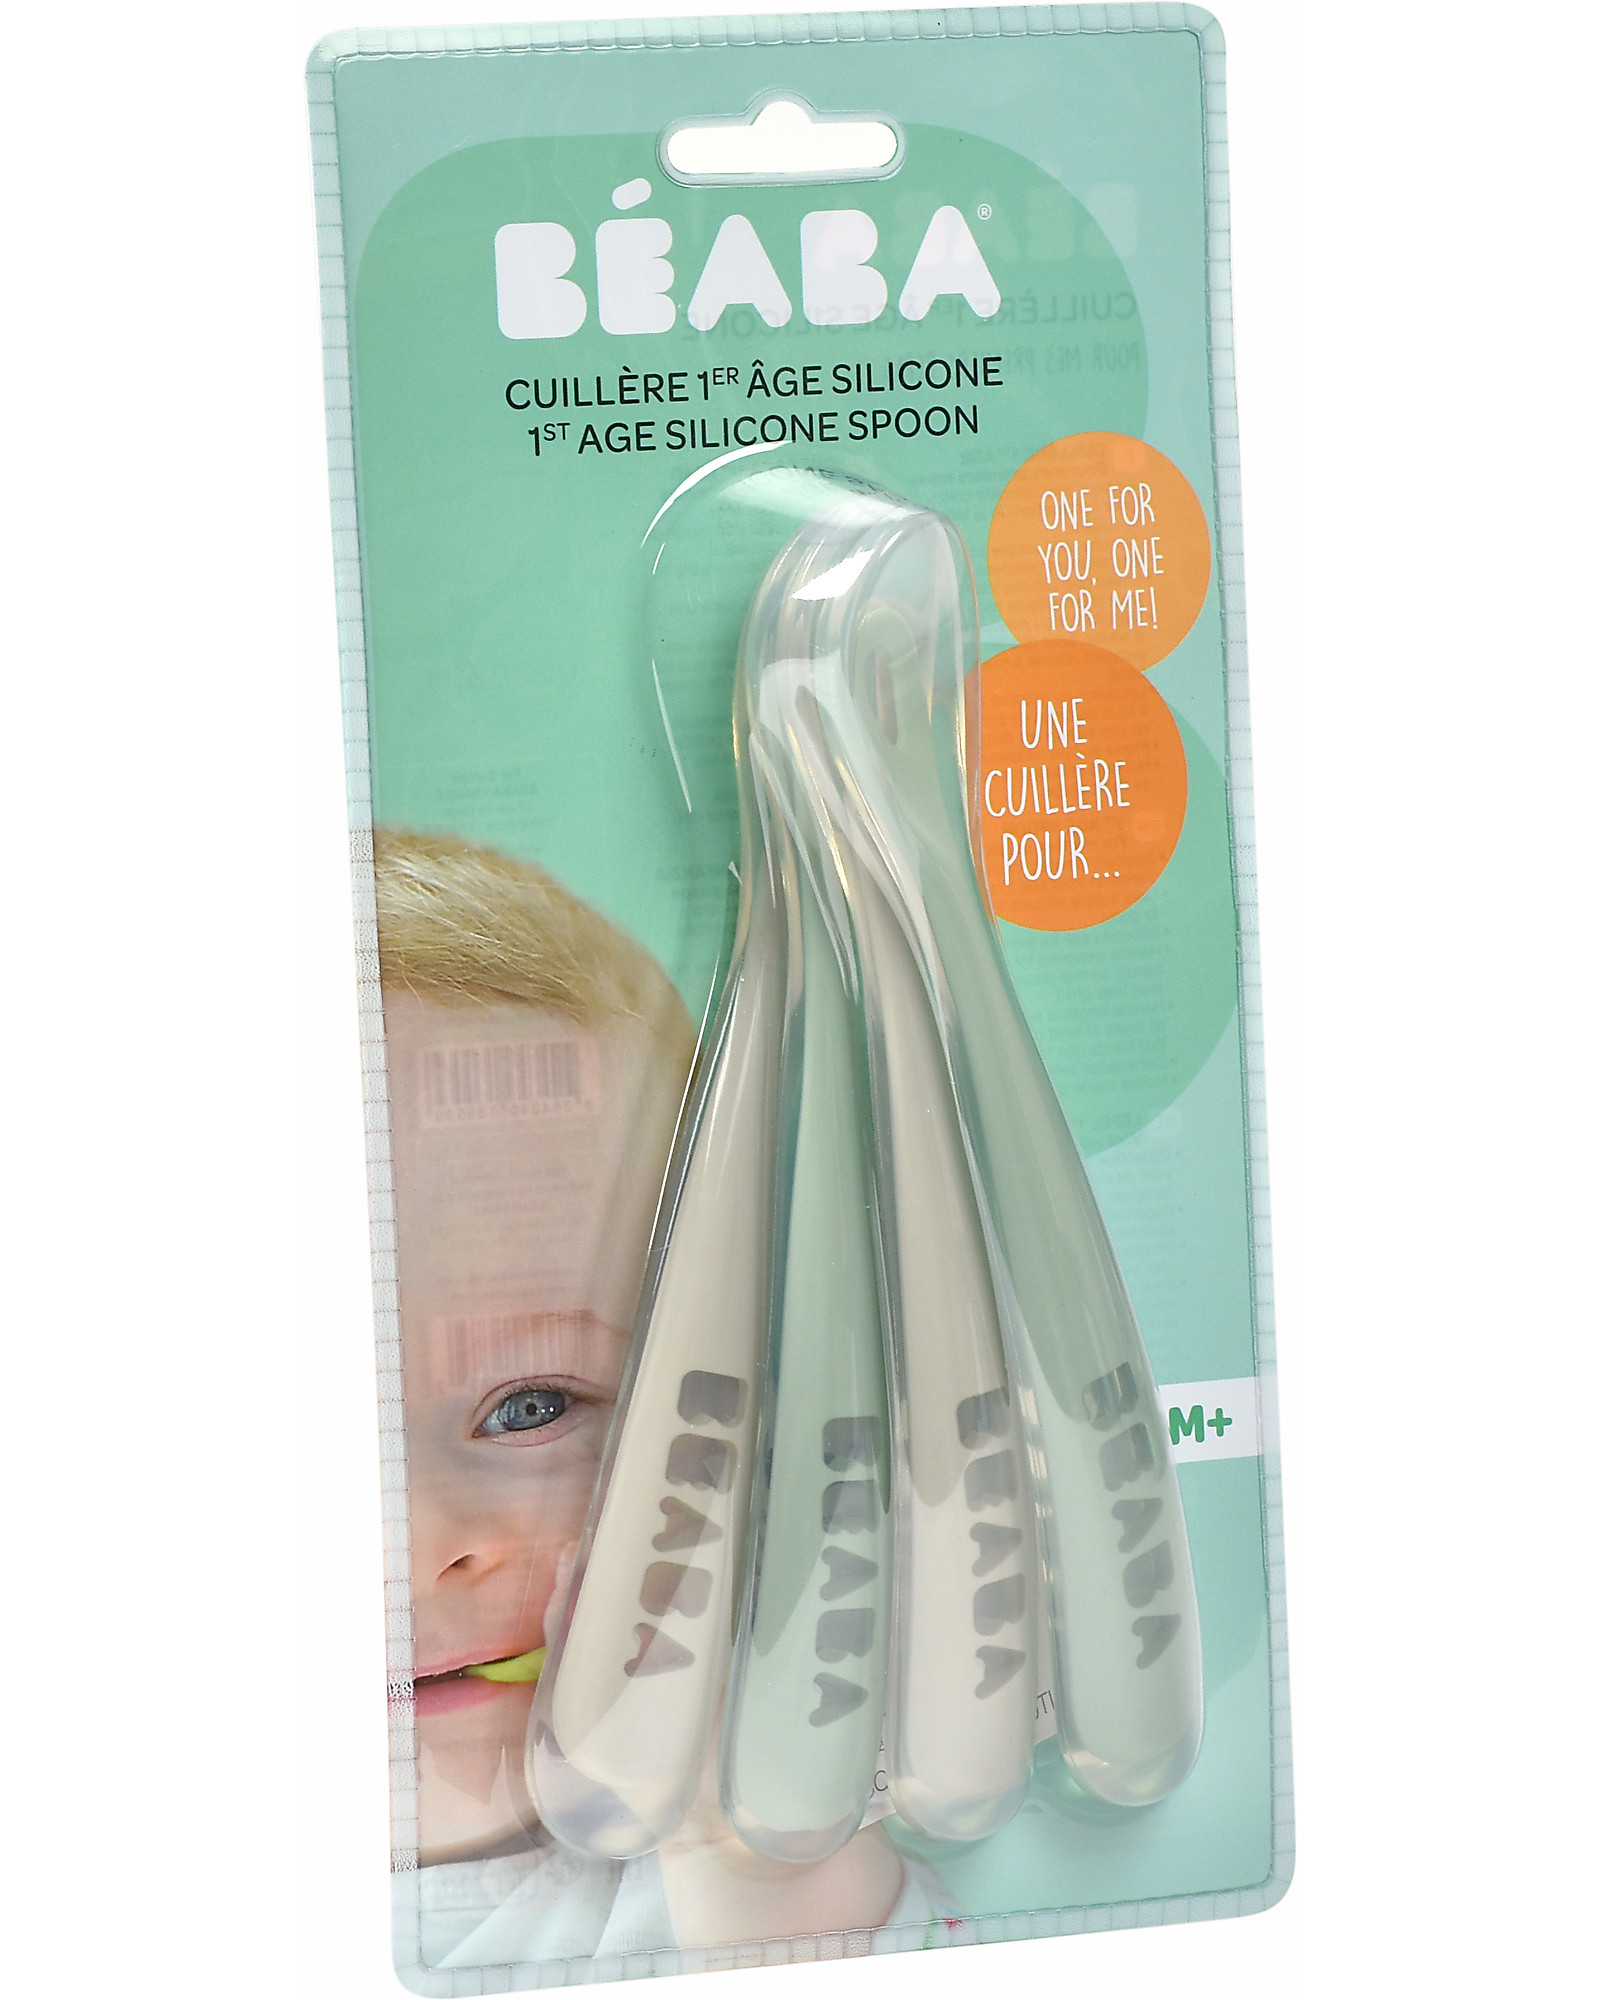 https://data.family-nation.com/imgprodotto/b%C3%A9aba-4-ergonomic-first-age-spoons-set-silicone-grey-and-sage-handy-for-adults-and-delicate-for-children-cutlery_445463_zoom.jpg